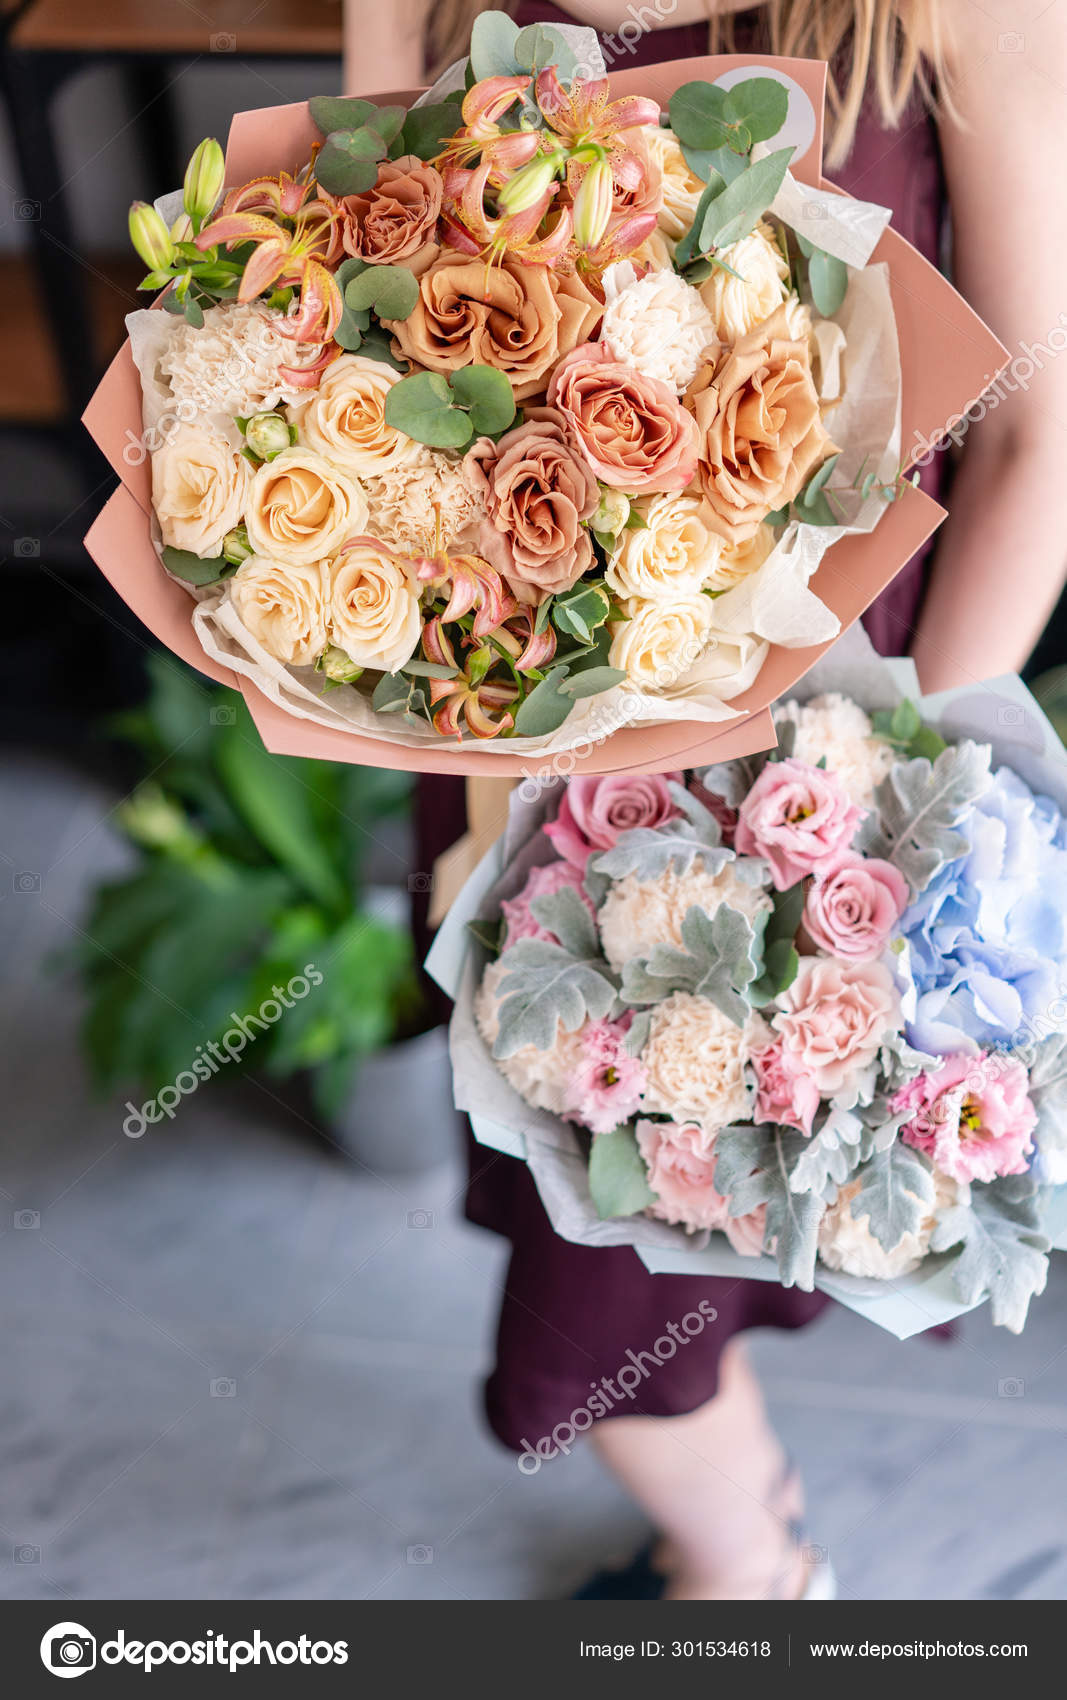 Two Small Beautiful Bouquets Of Mixed Flowers In Woman Floral Shop Concept  Beautiful Fresh Cut Flowers Stock Image Image Of Floral, Gardener:  148945709